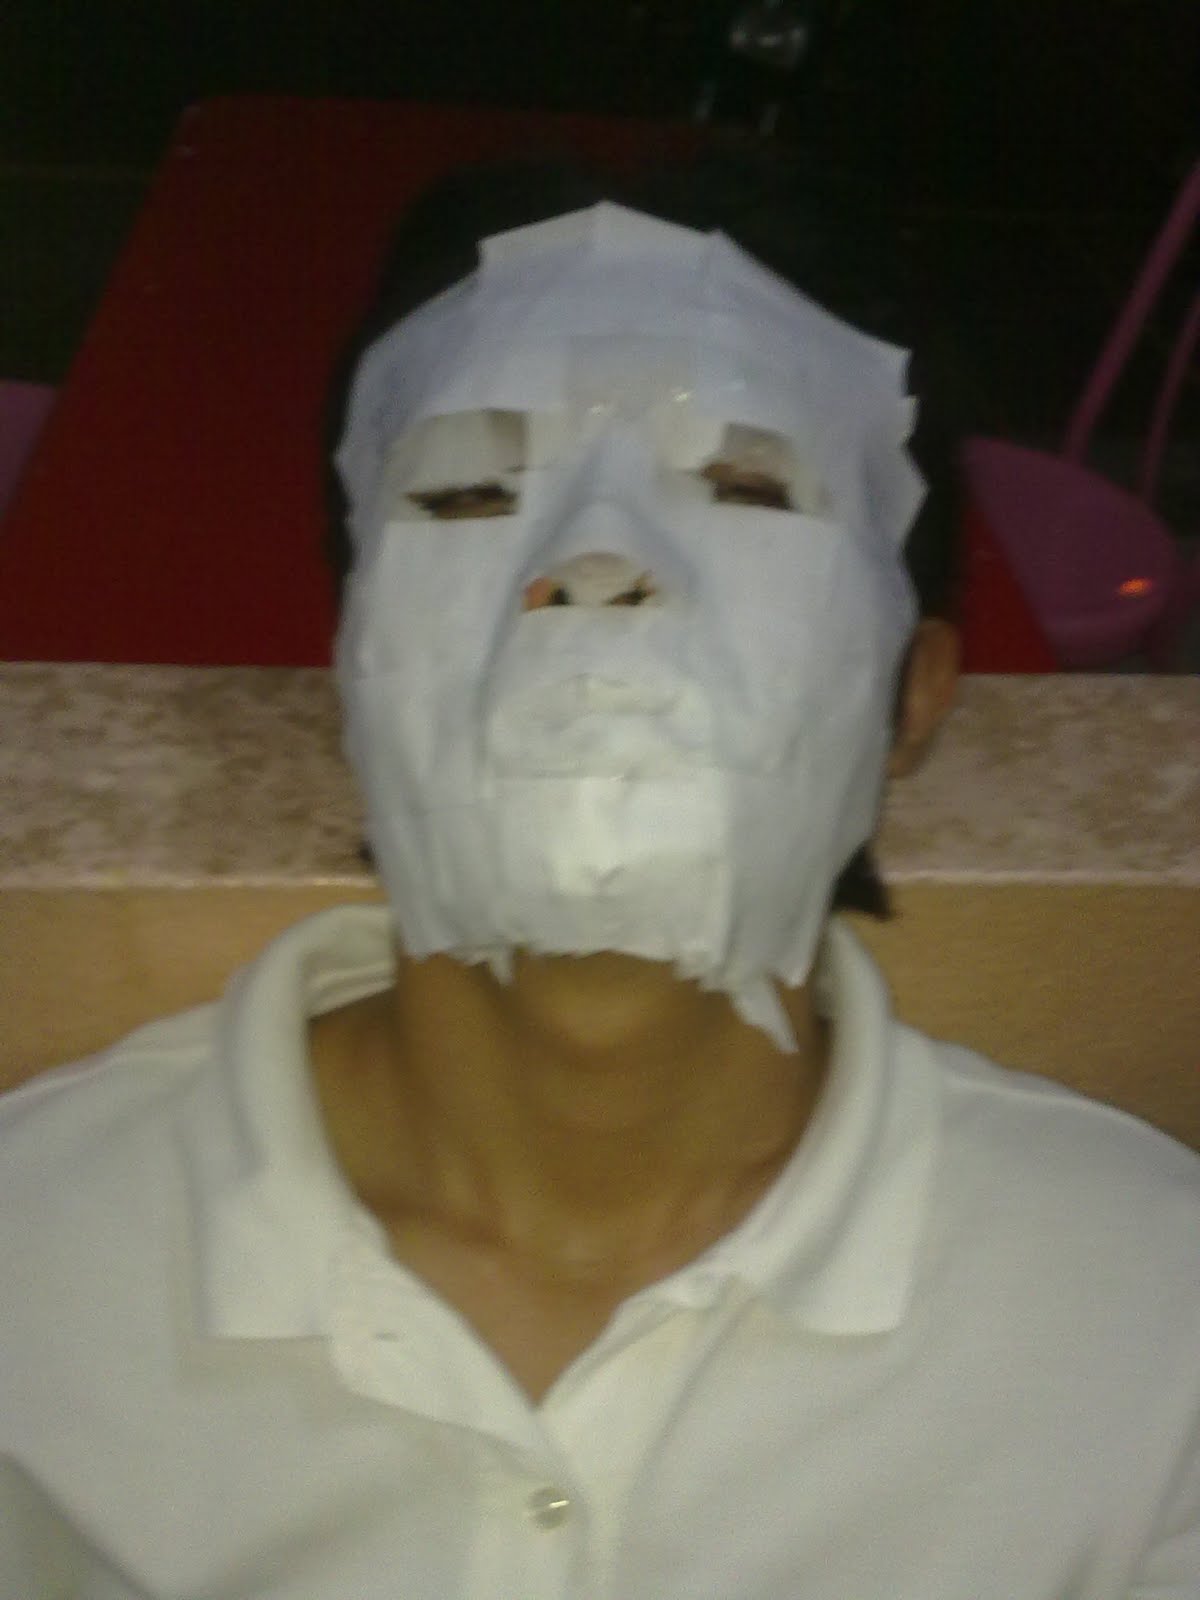 ... the papers put on top of the face with the 1st layer of tissue paper